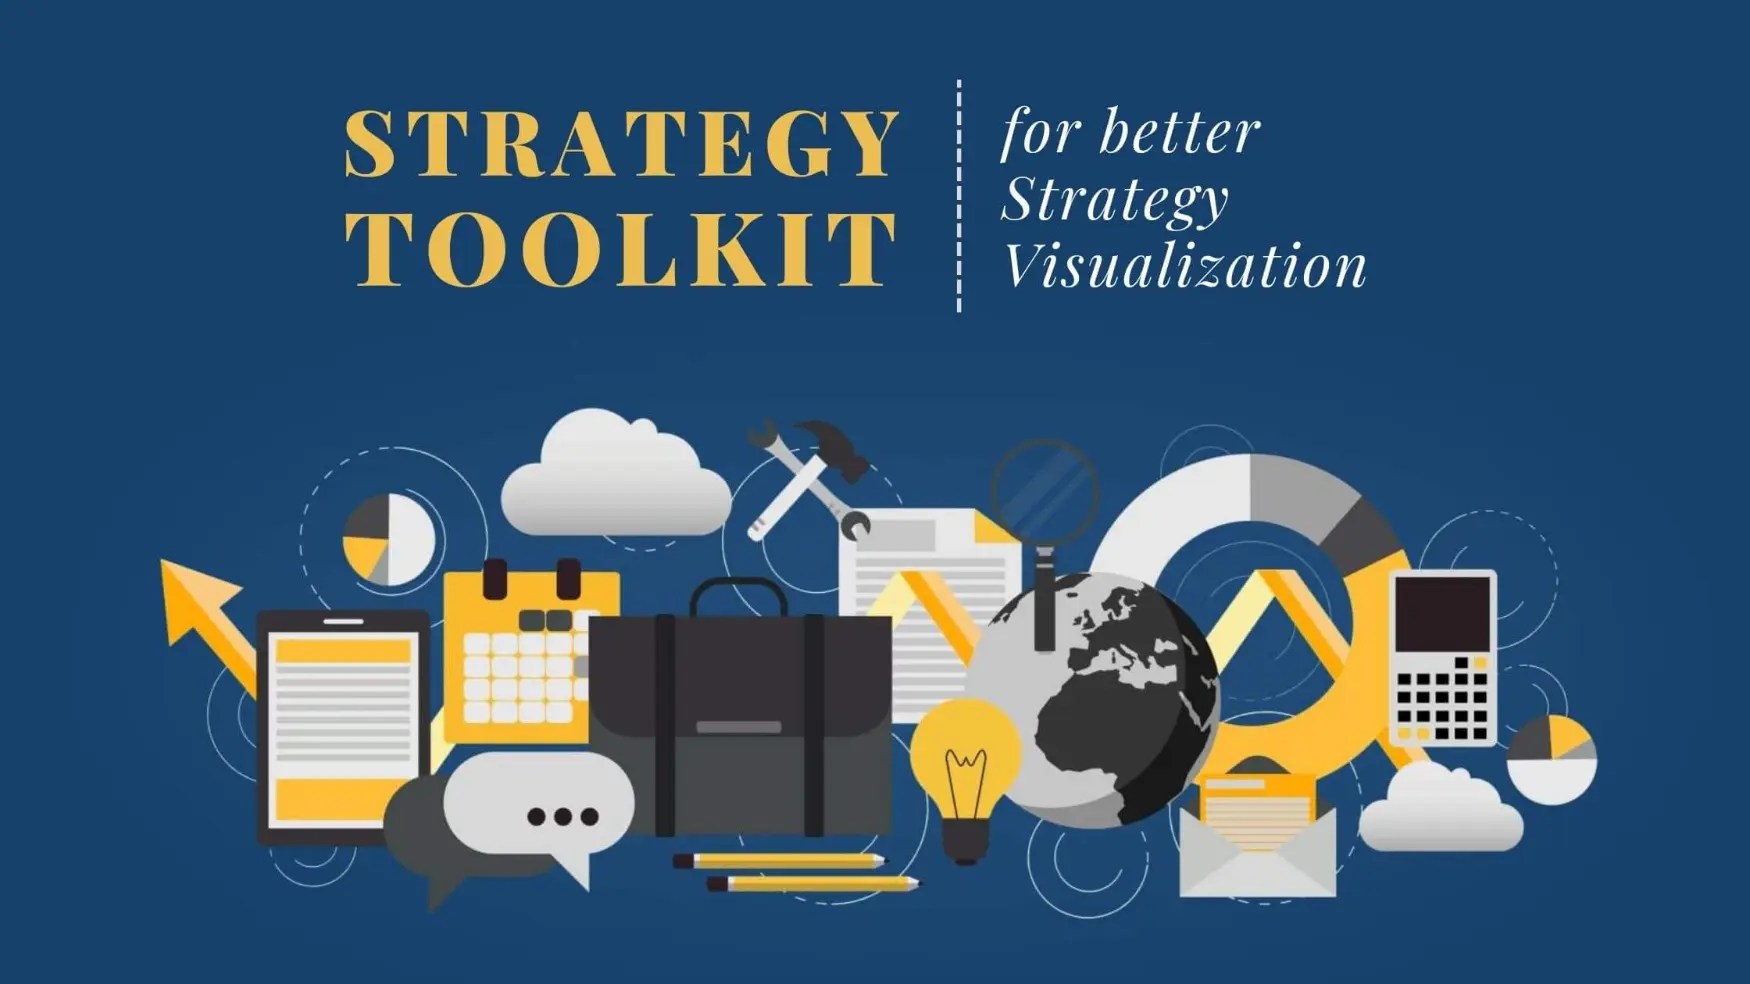 Strategy Toolkit for Better Strategy Visualization